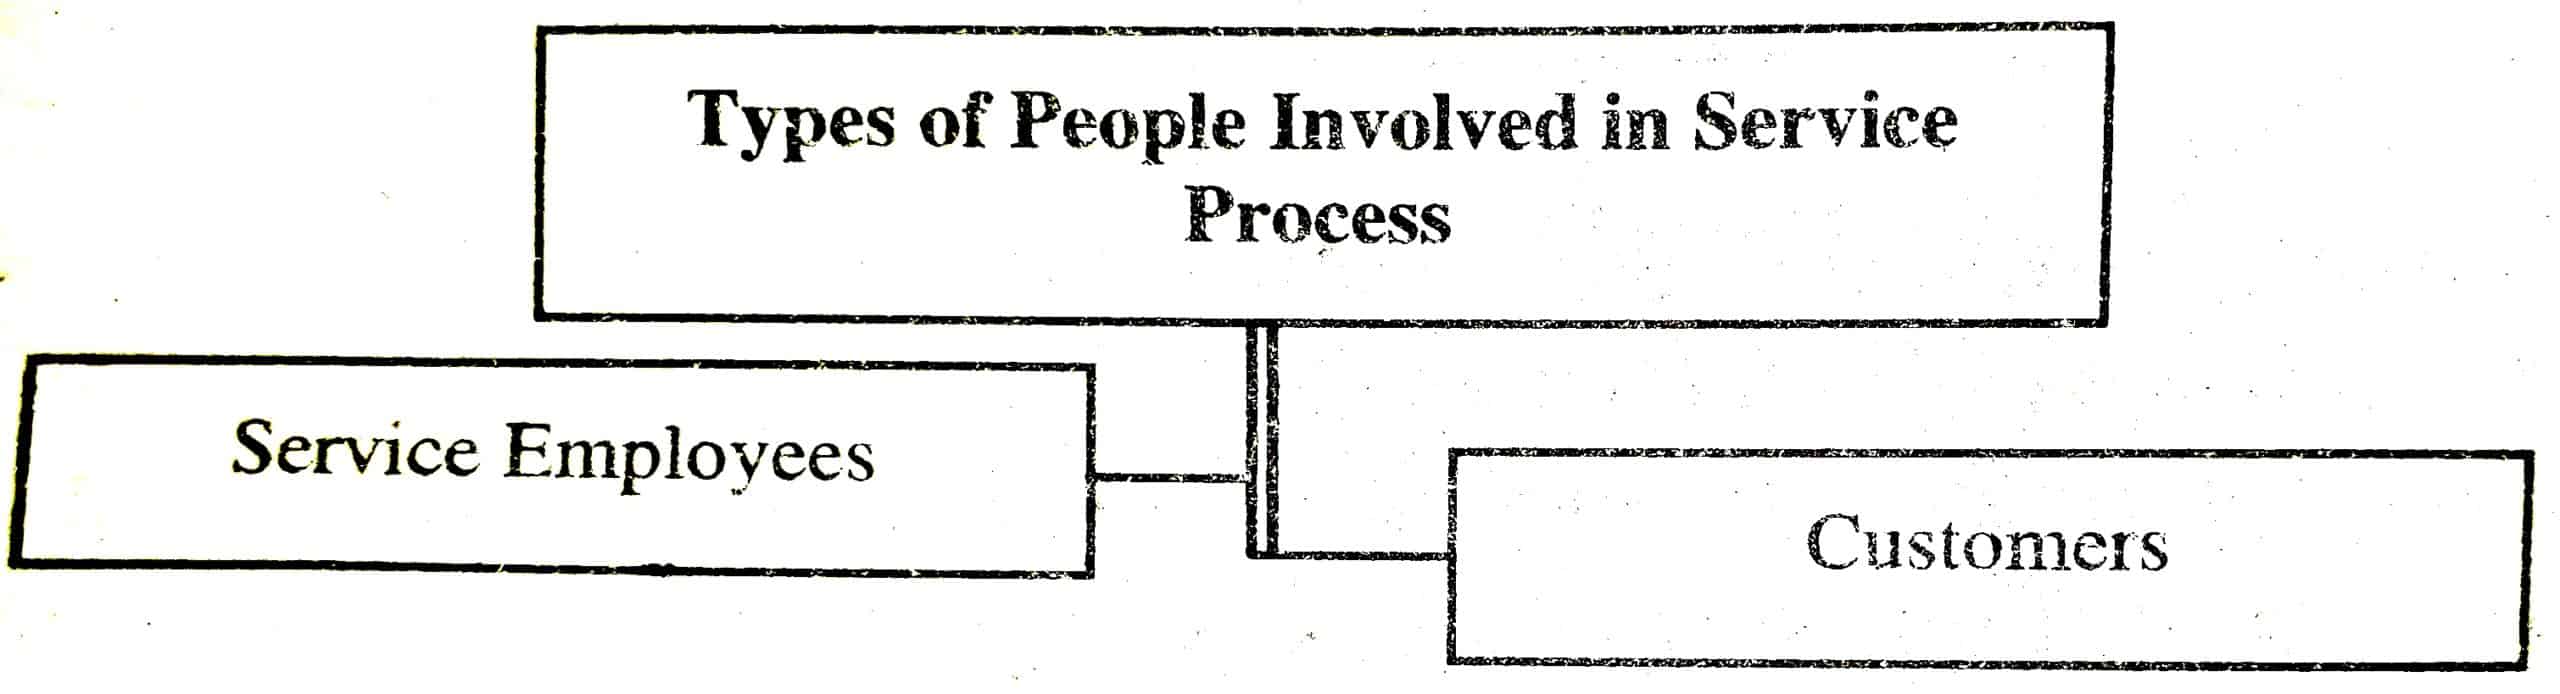 Types of People Involved in Service Process